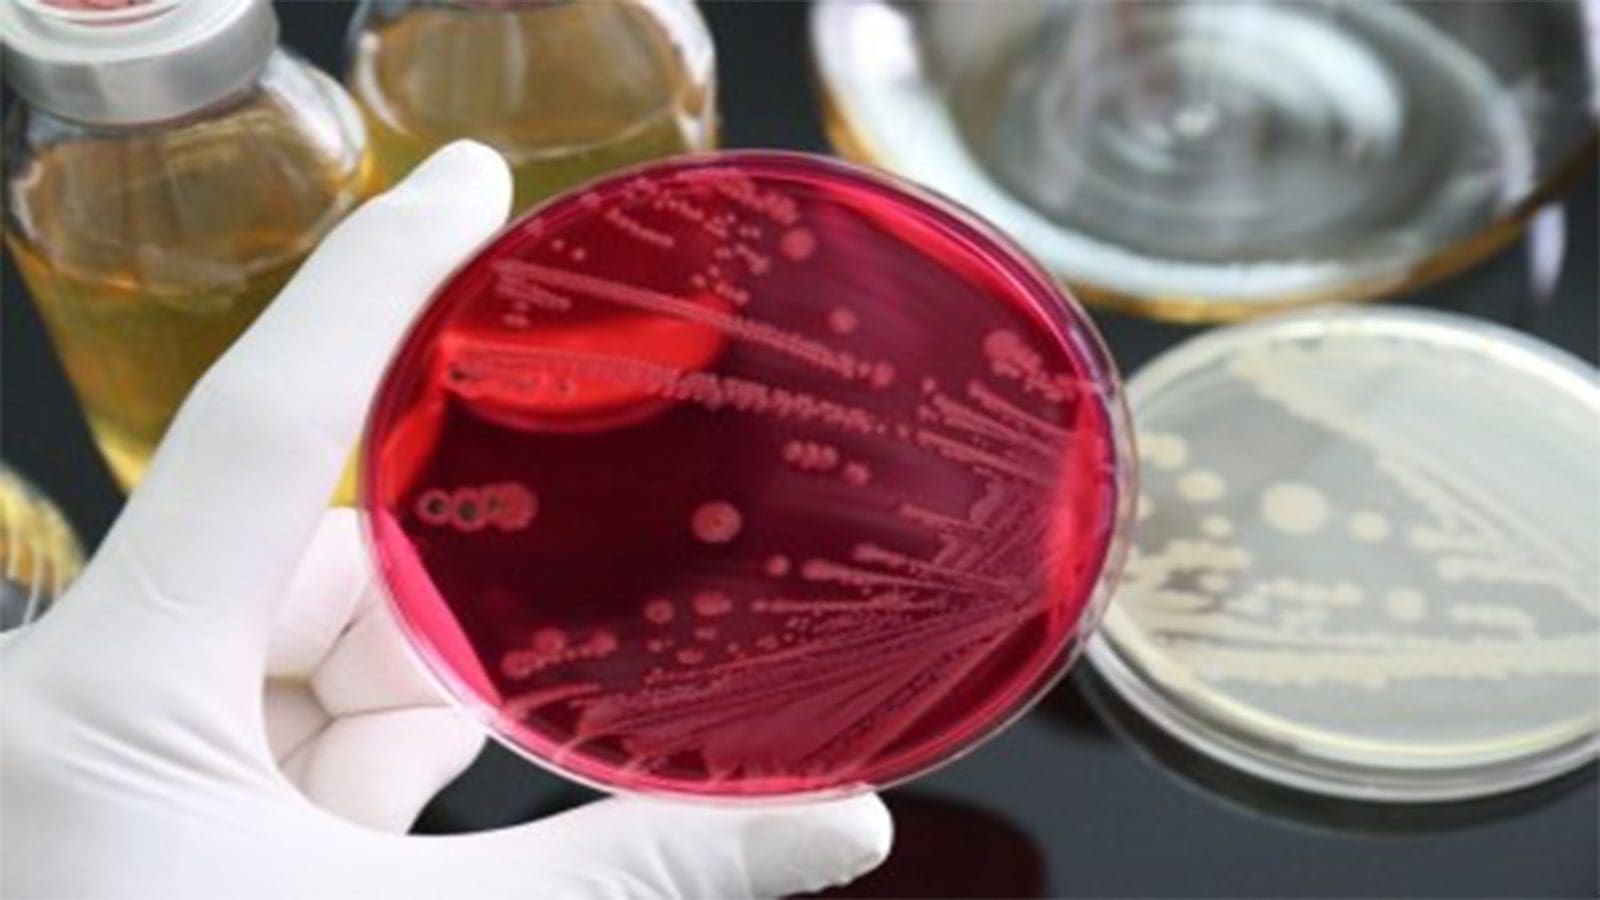 USDA researchers uncover Salmonella’s survival strategies in food processing facilities